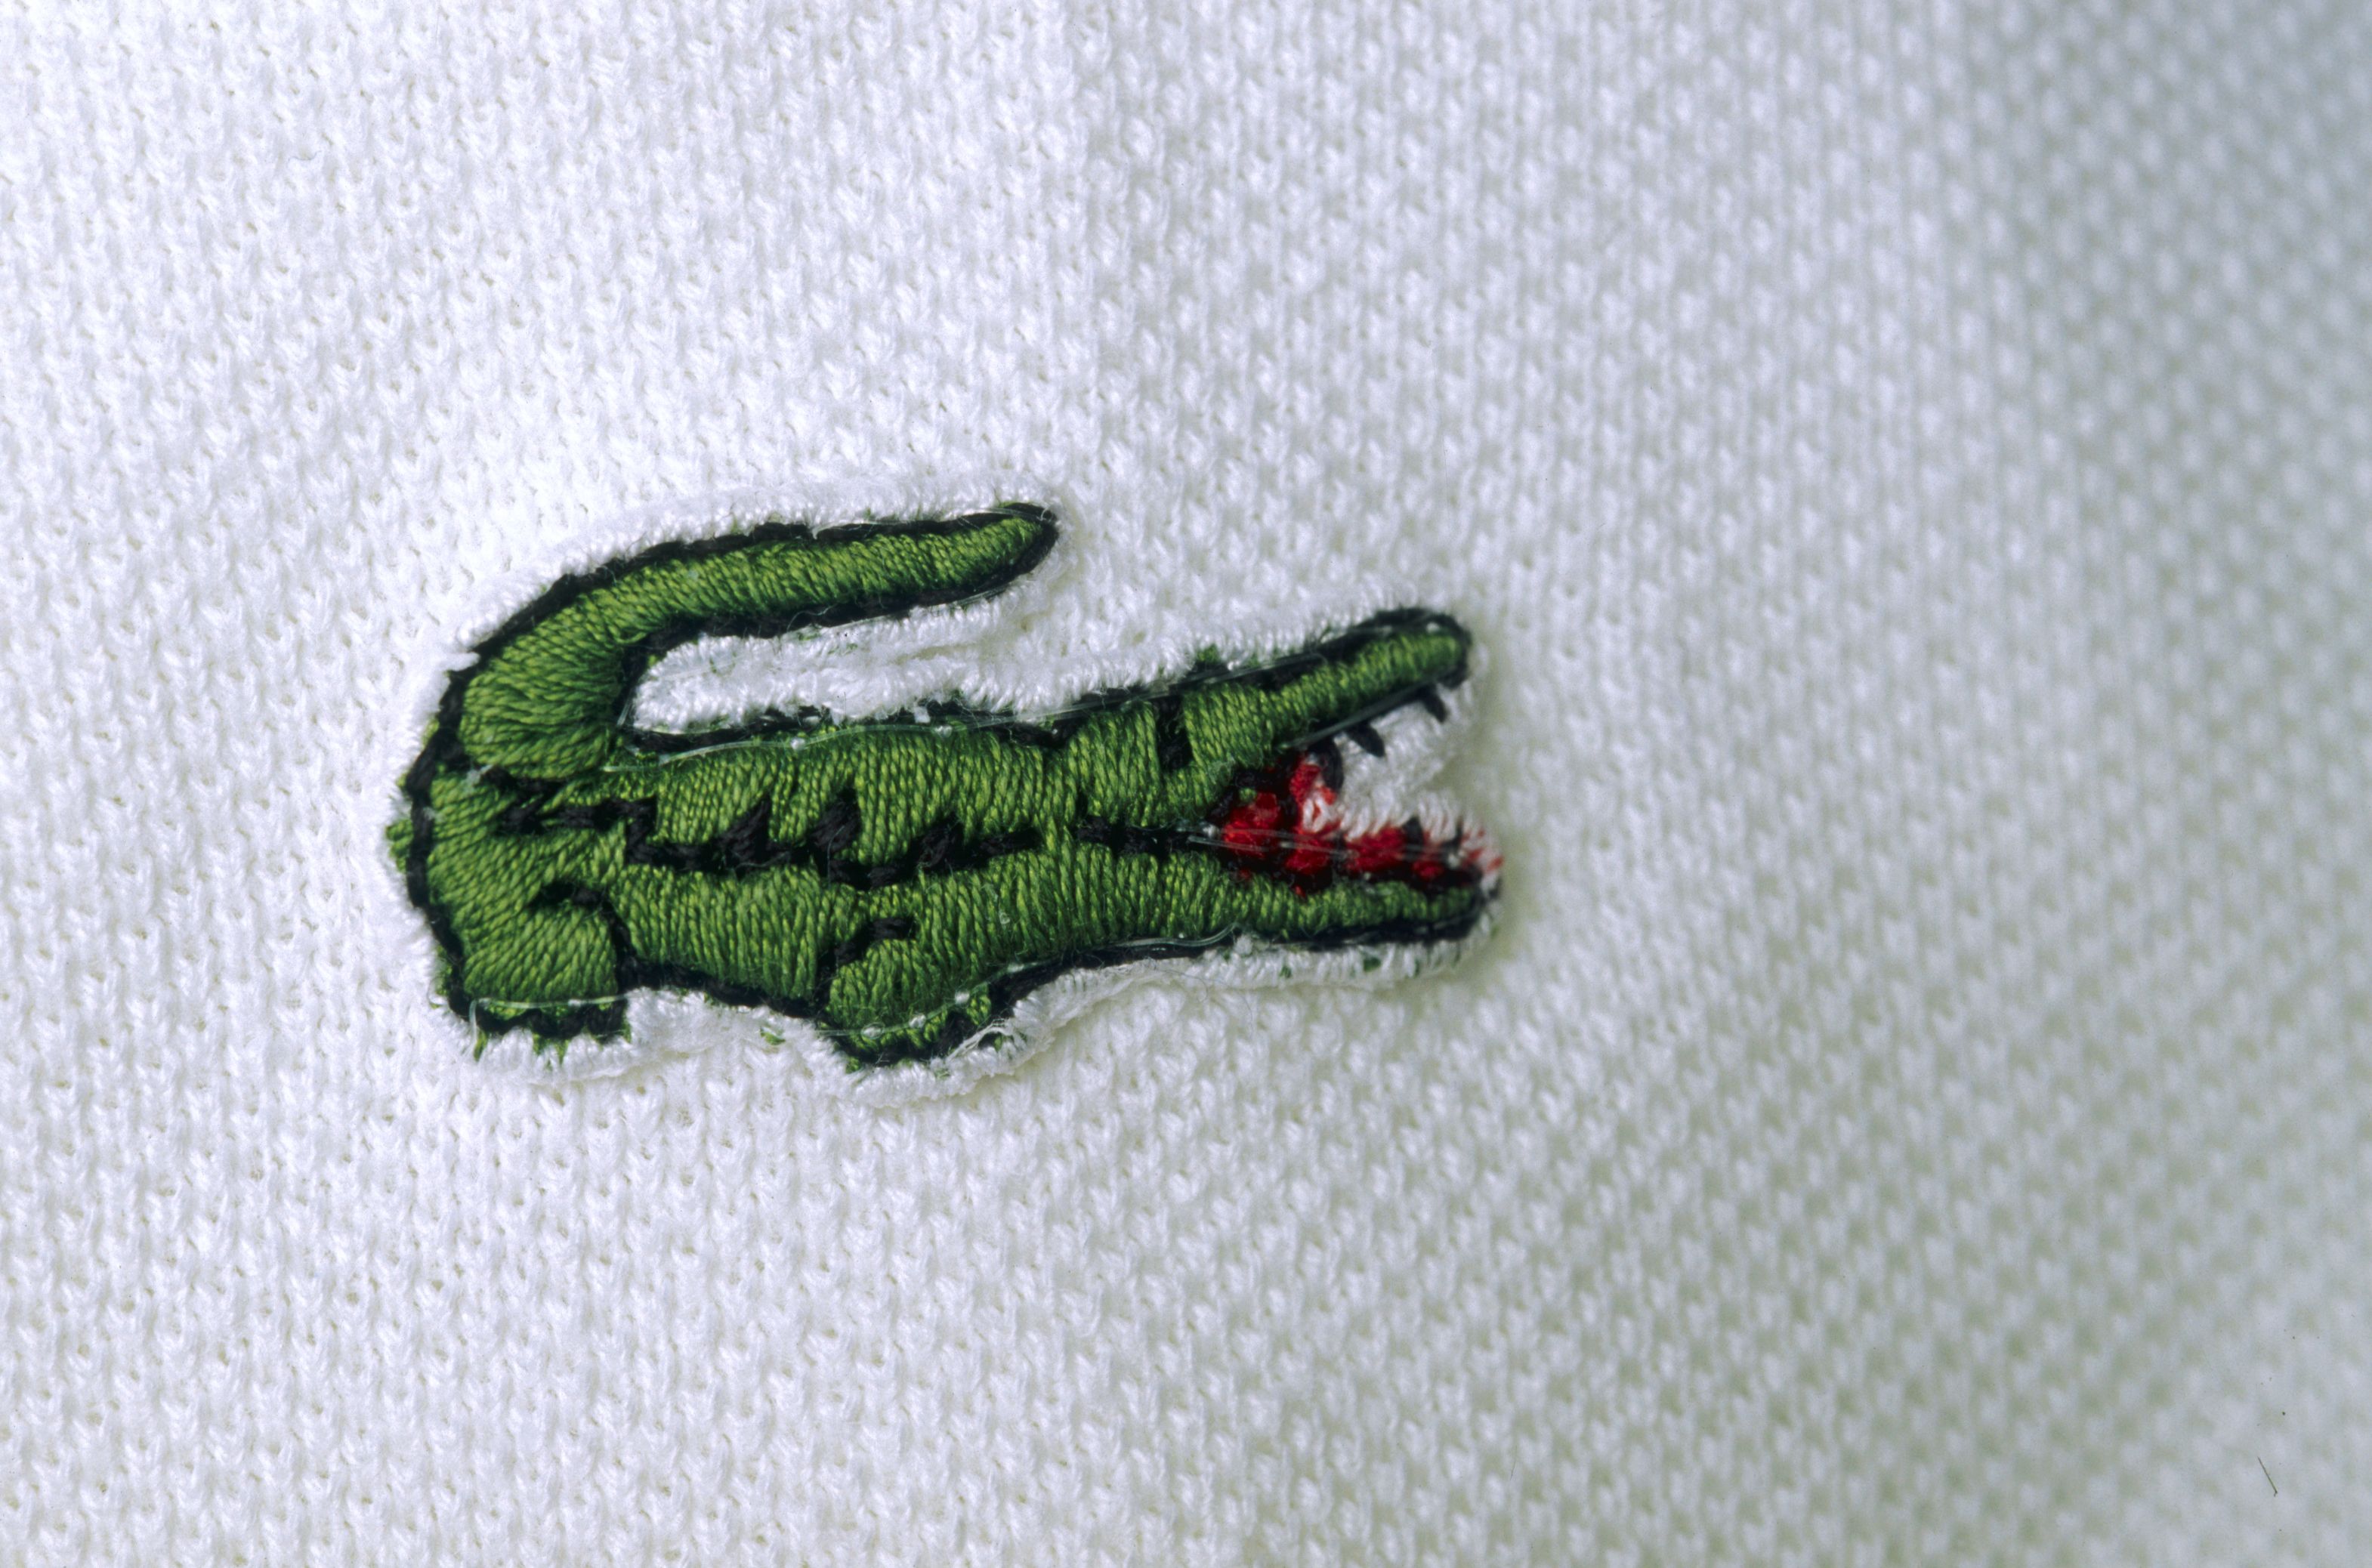 møl i stedet lustre How Lacoste led the way as one of the first brands to put a logo on clothing